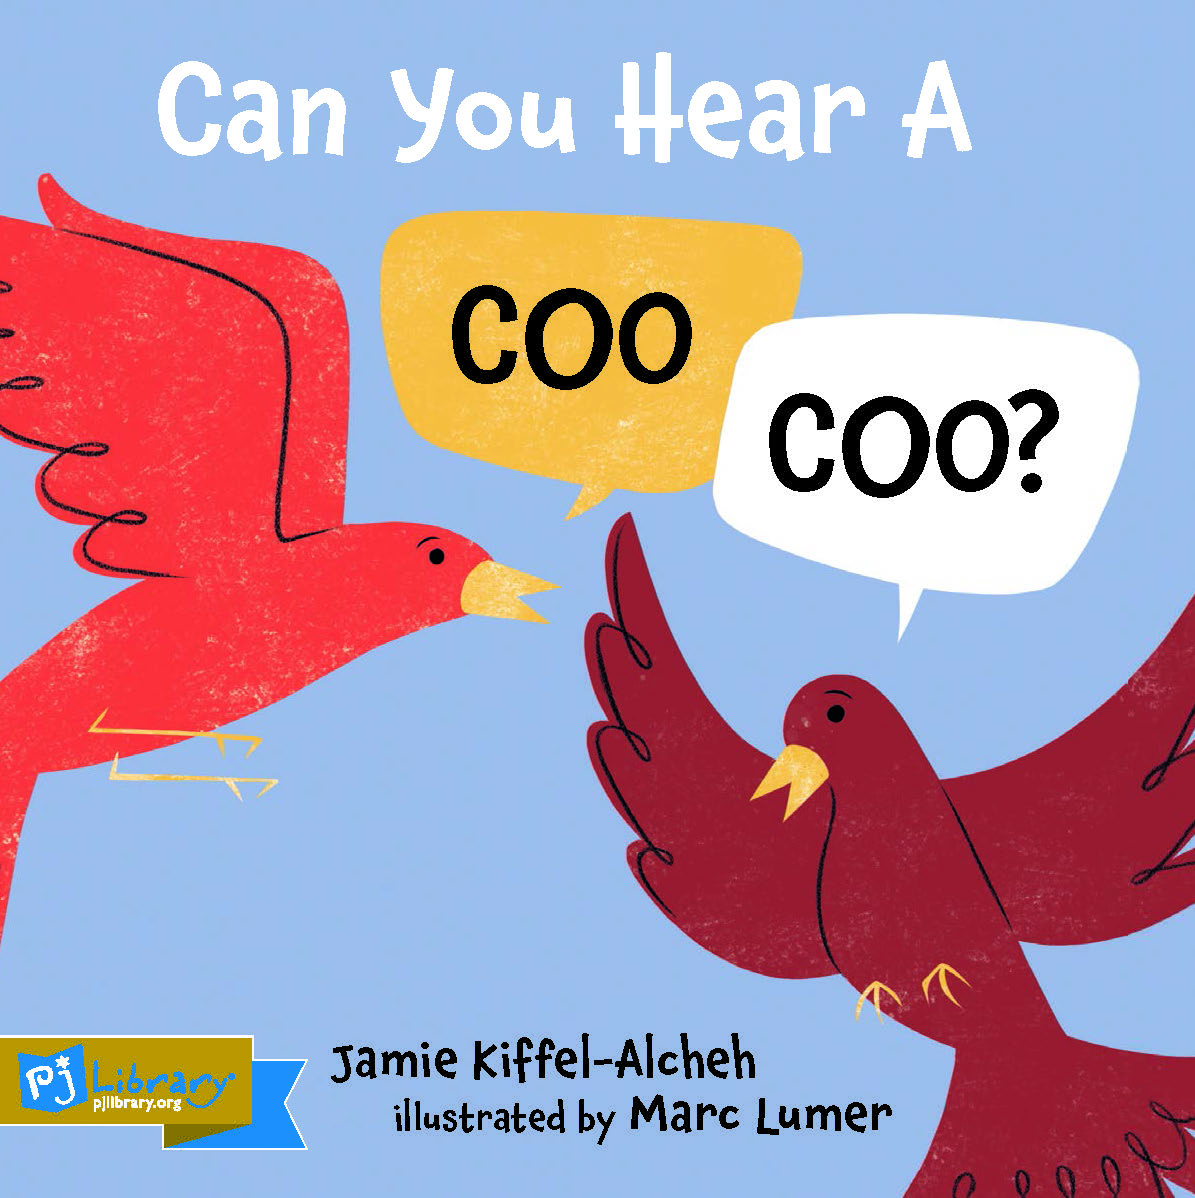 Can You Hear a Coo Coo?